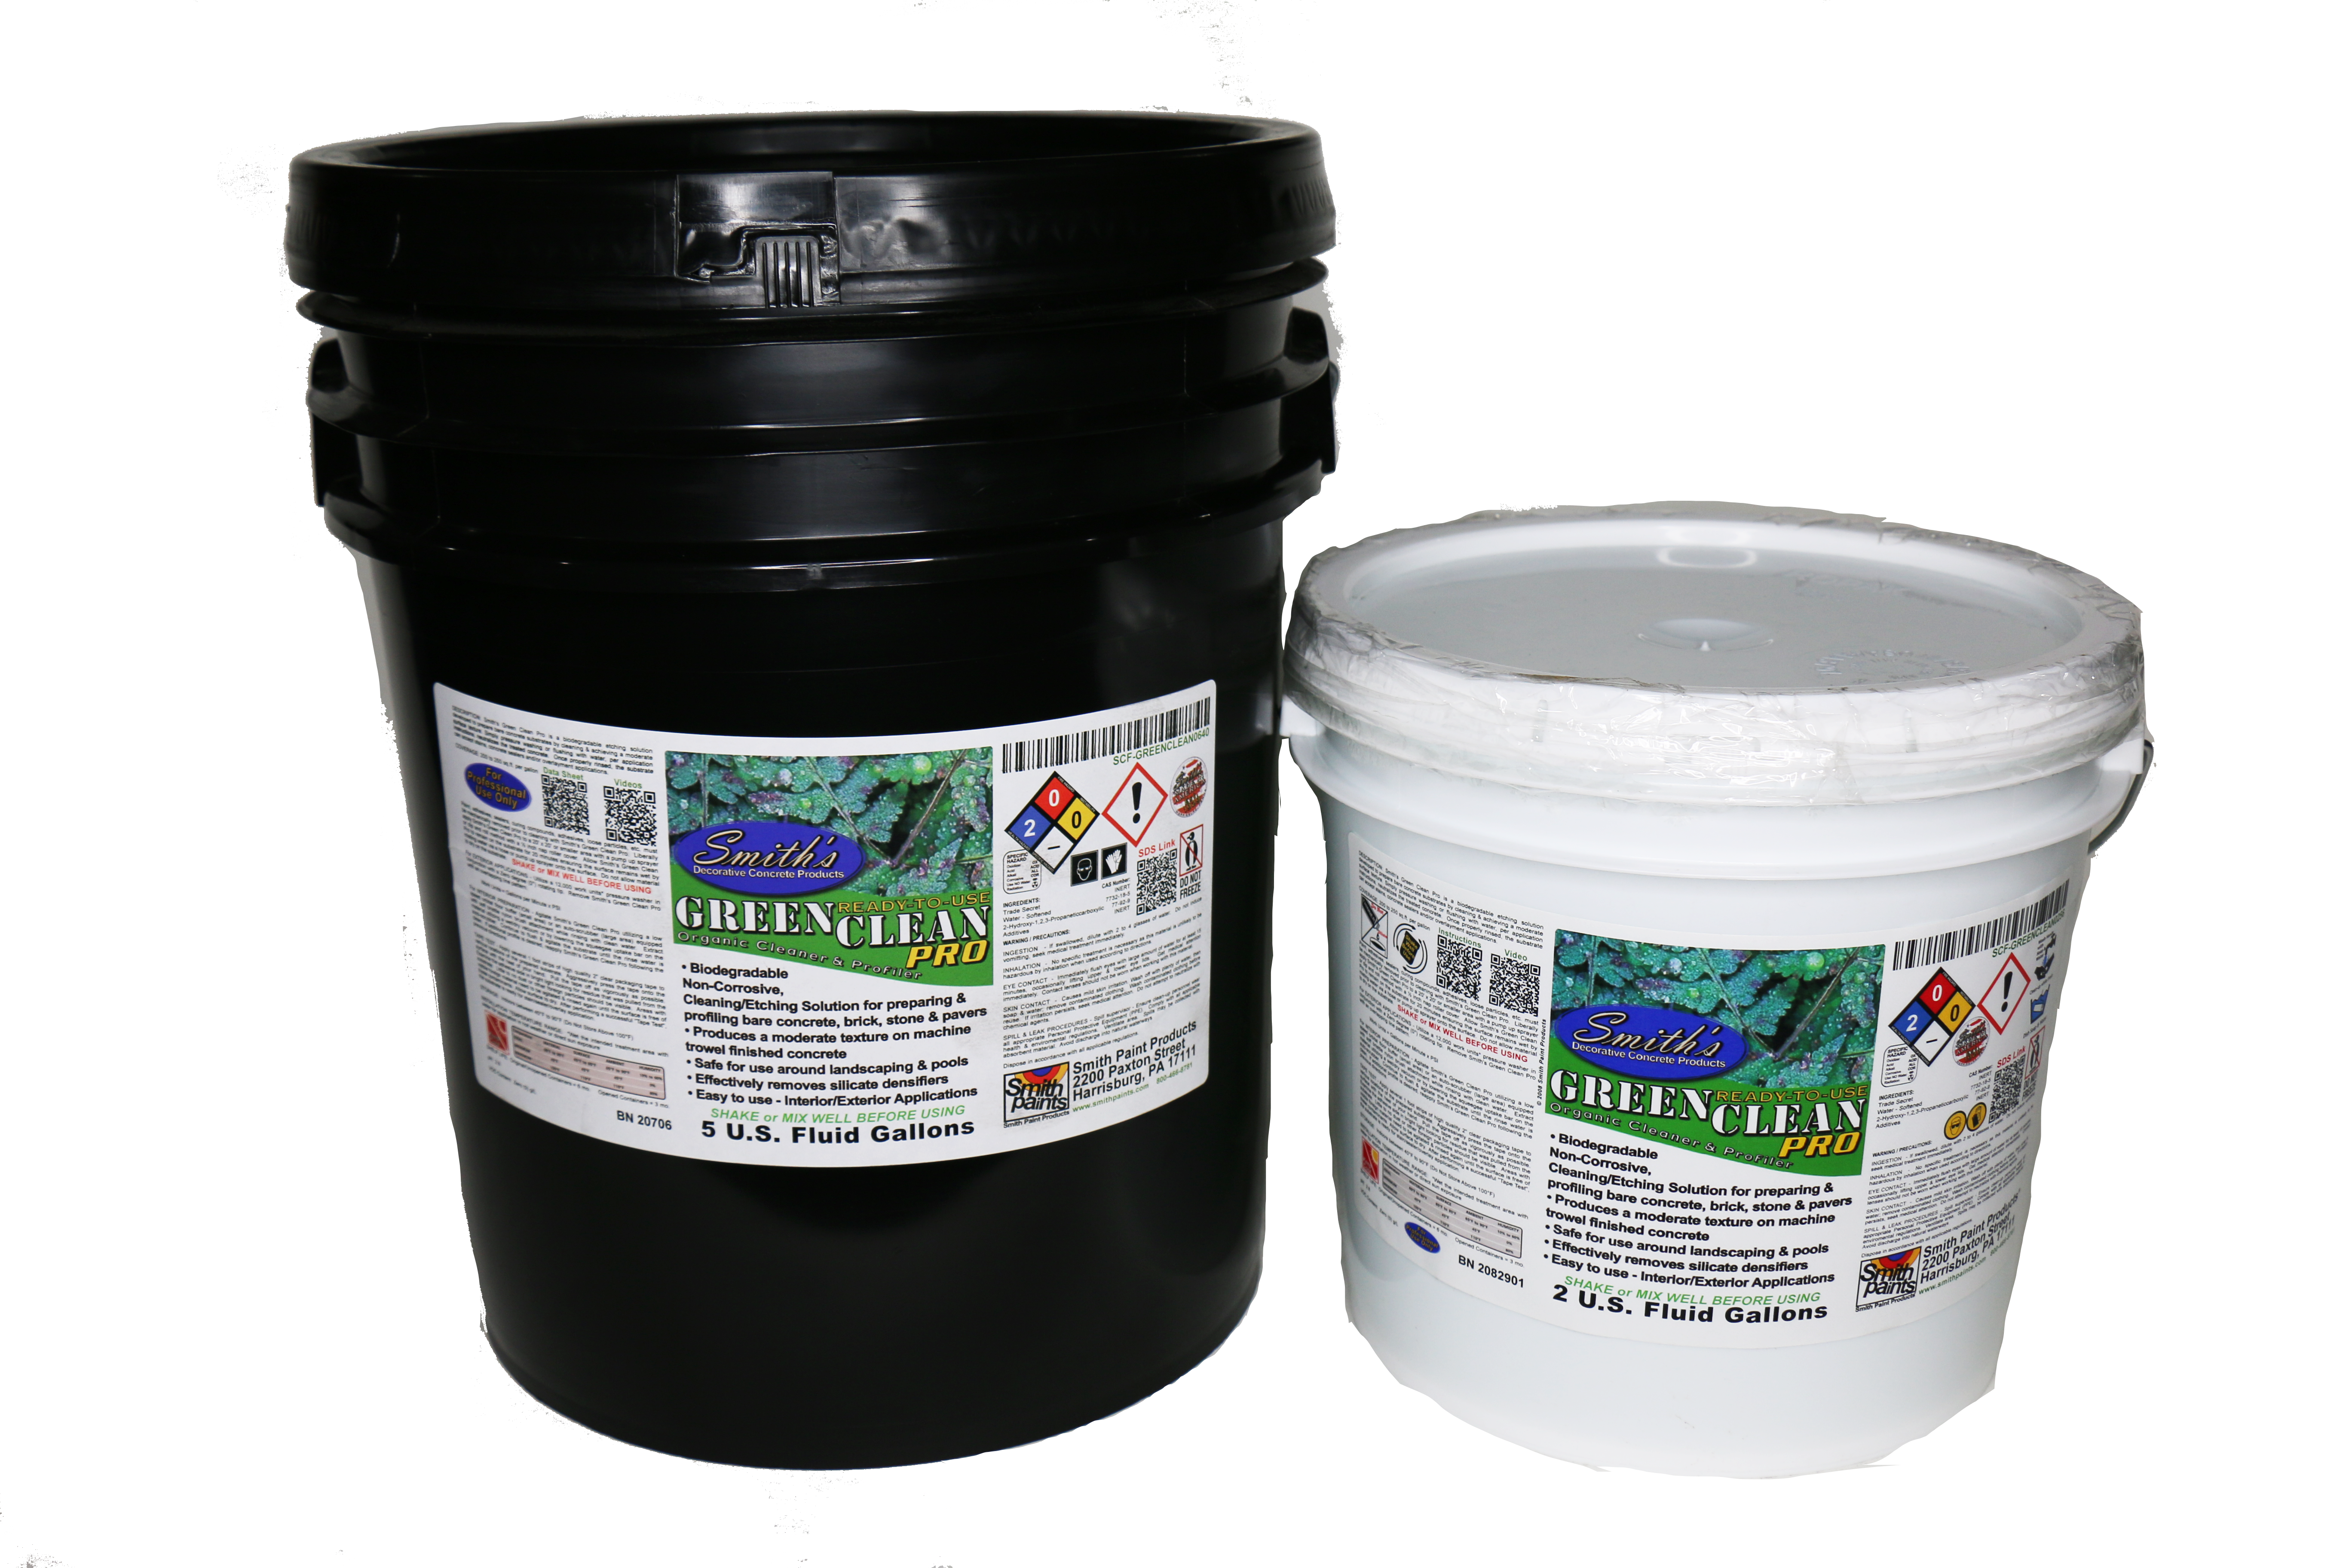 Smith's Green Clean Pro Organic Cleaner & Profiler - Construction Powders & Chemicals